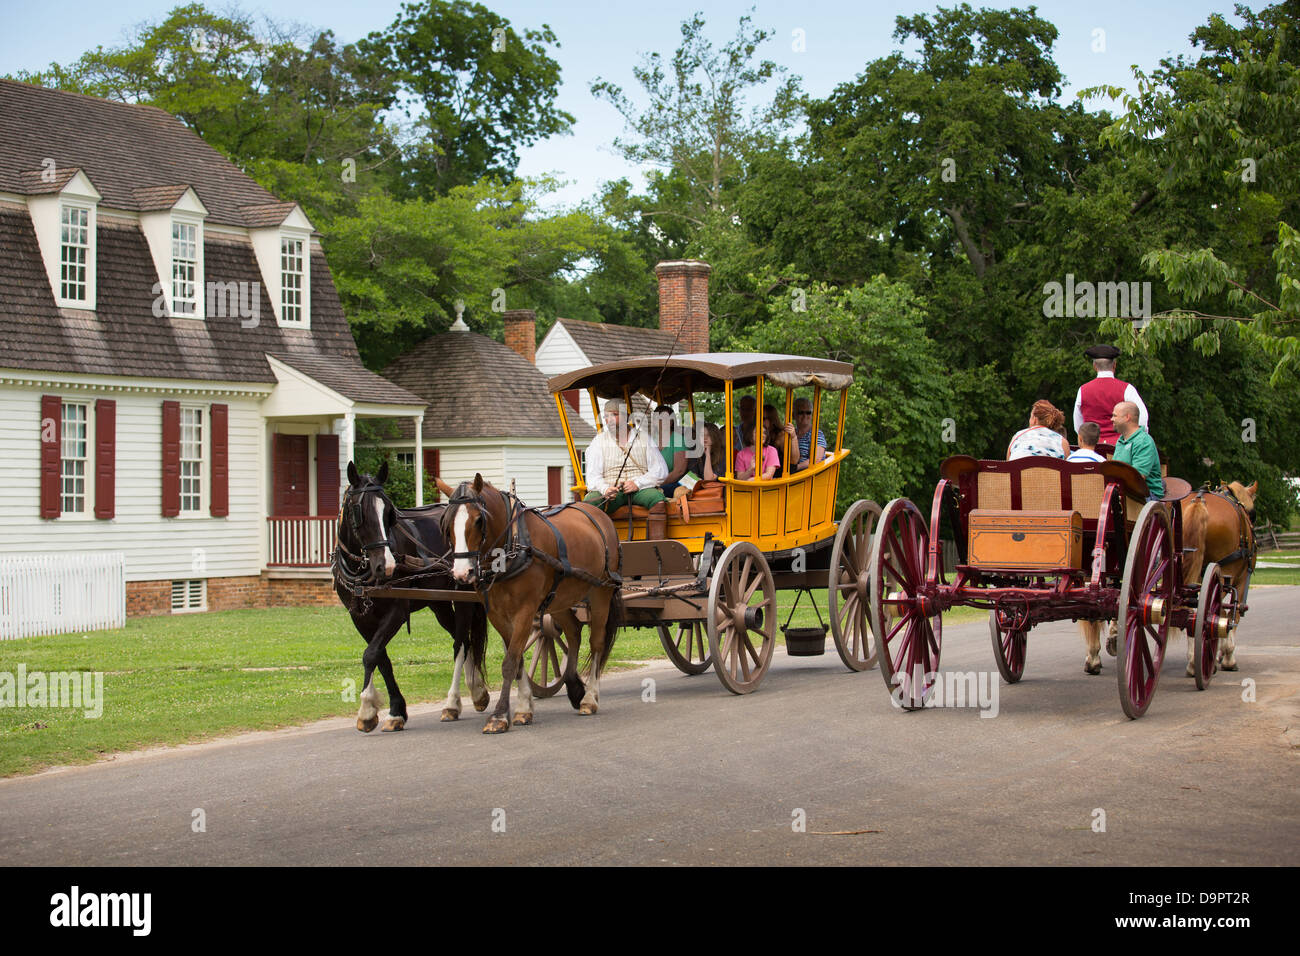 Carriages pass on road at Williamsburg, Virginia, USA Stock Photo